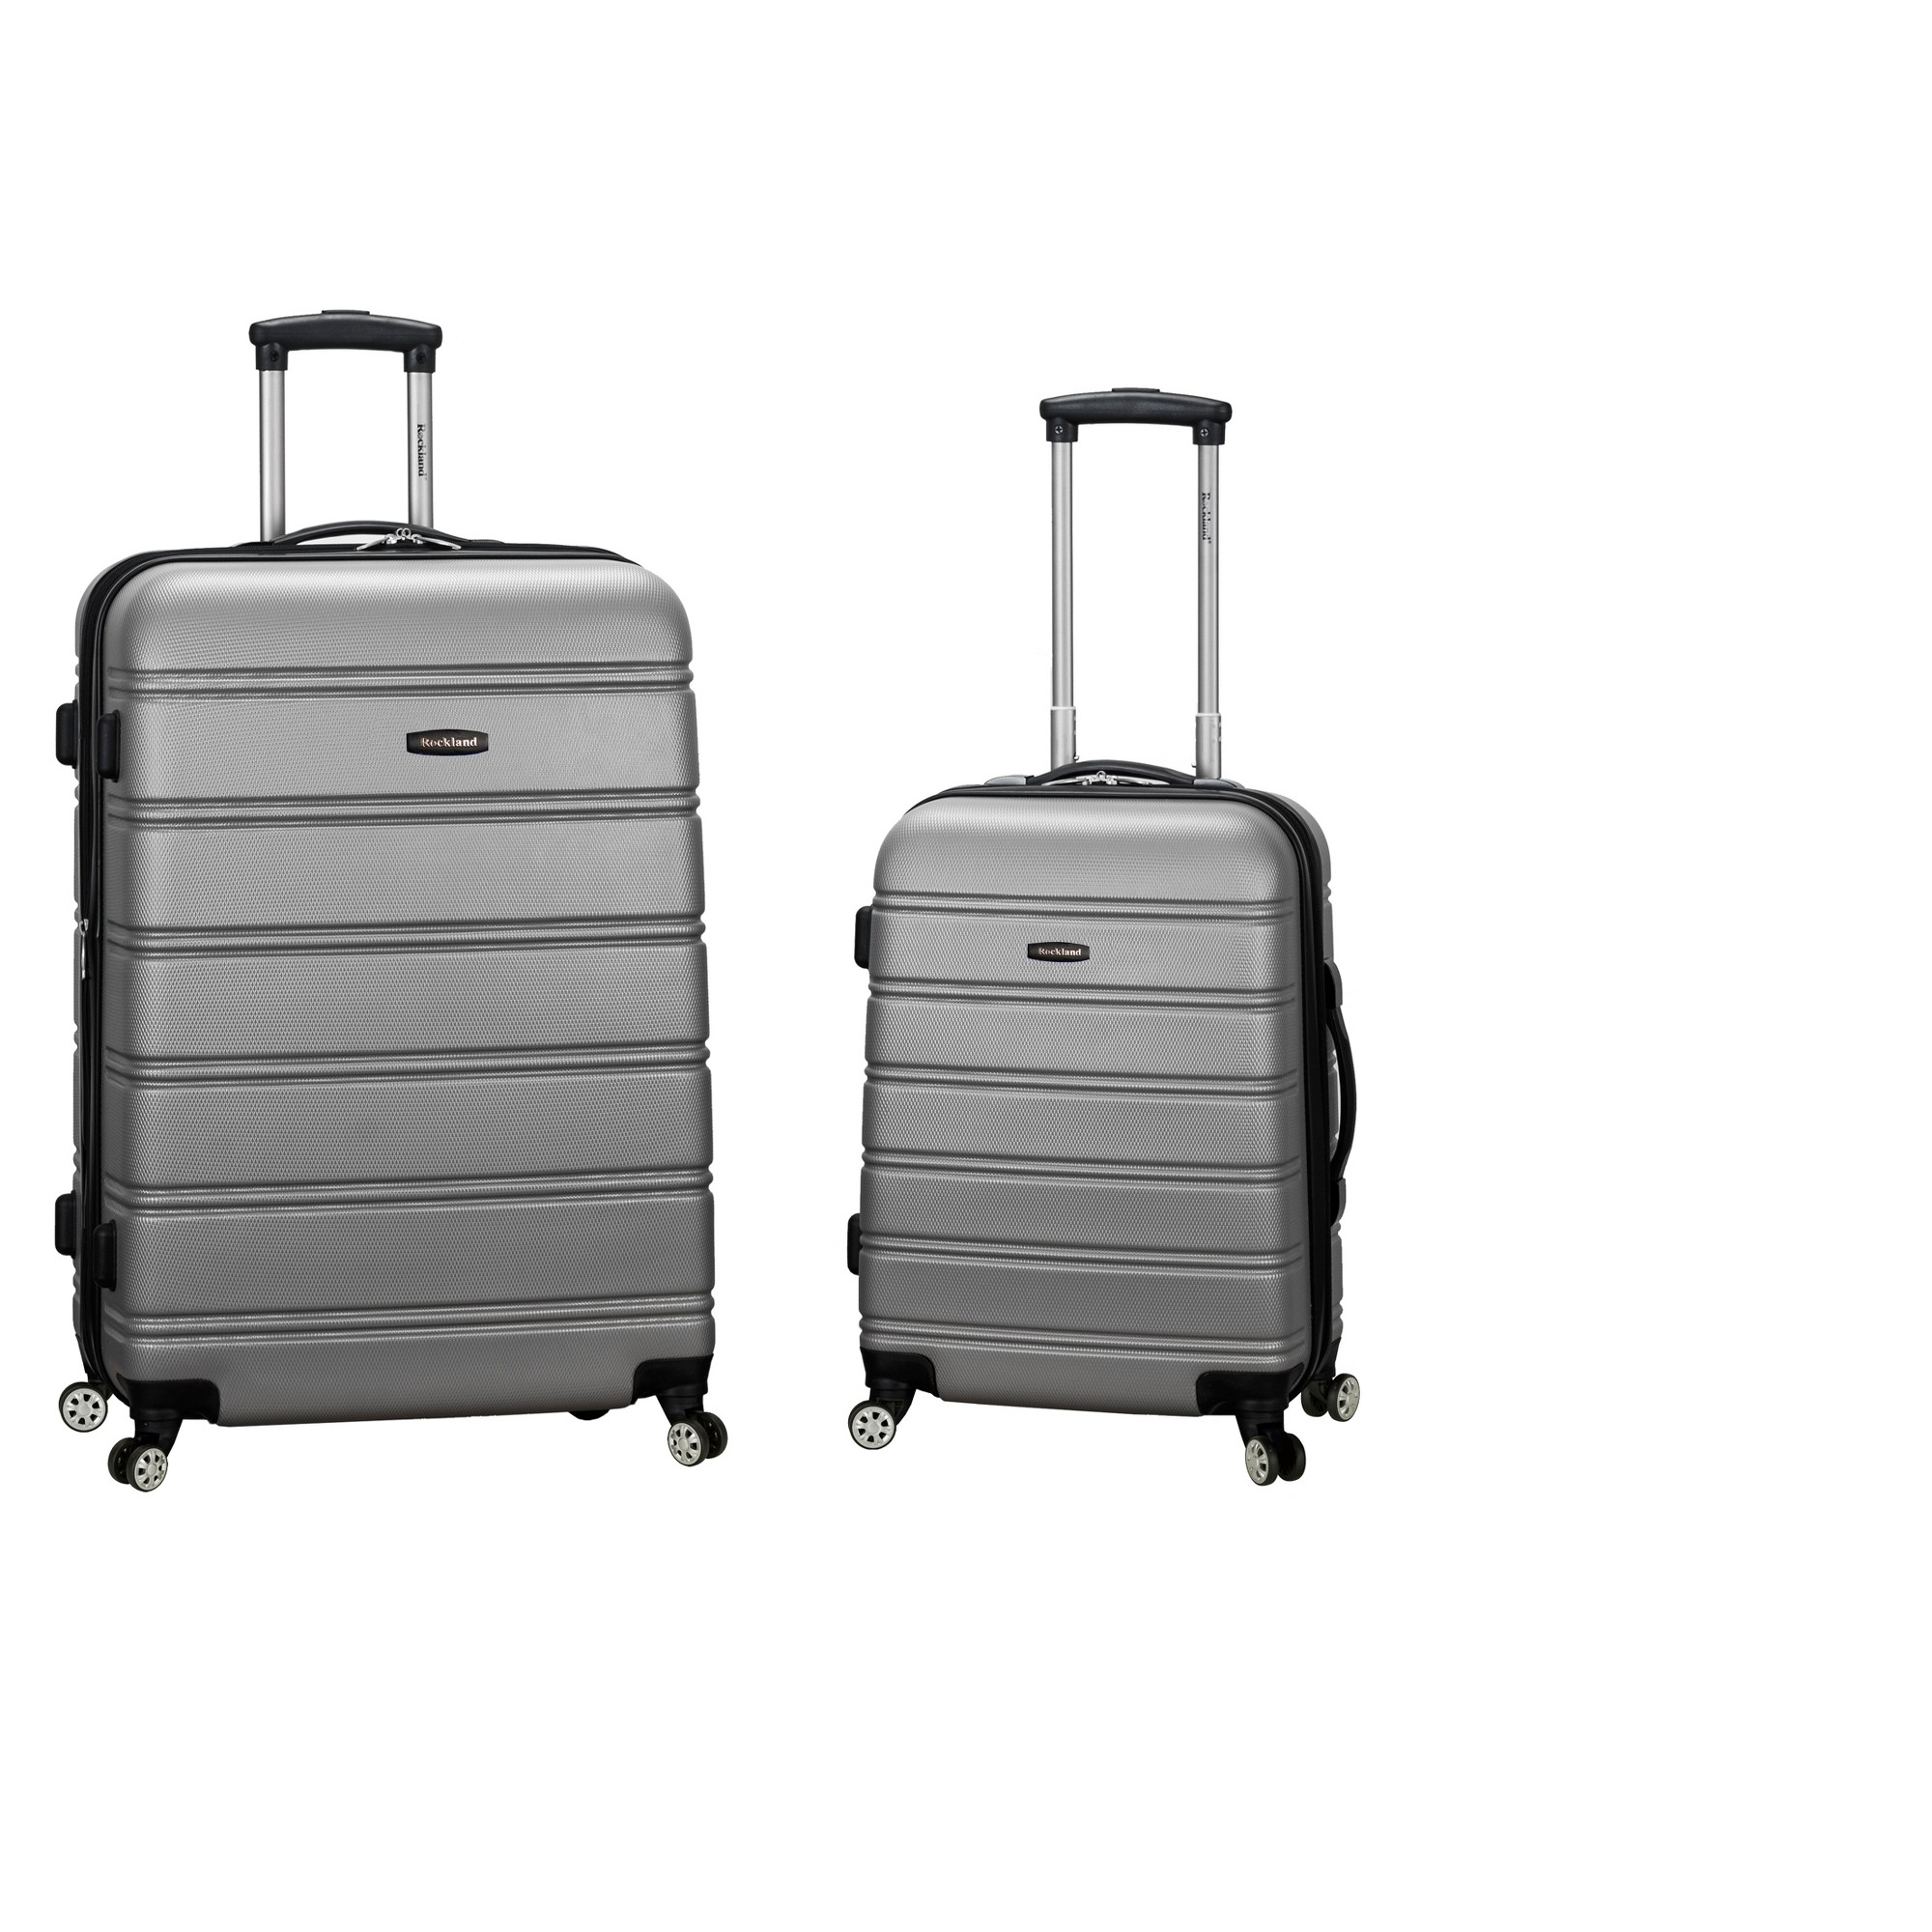 Rockland Melbourne 2pc Expandable ABS Spinner Luggage Set - Silver